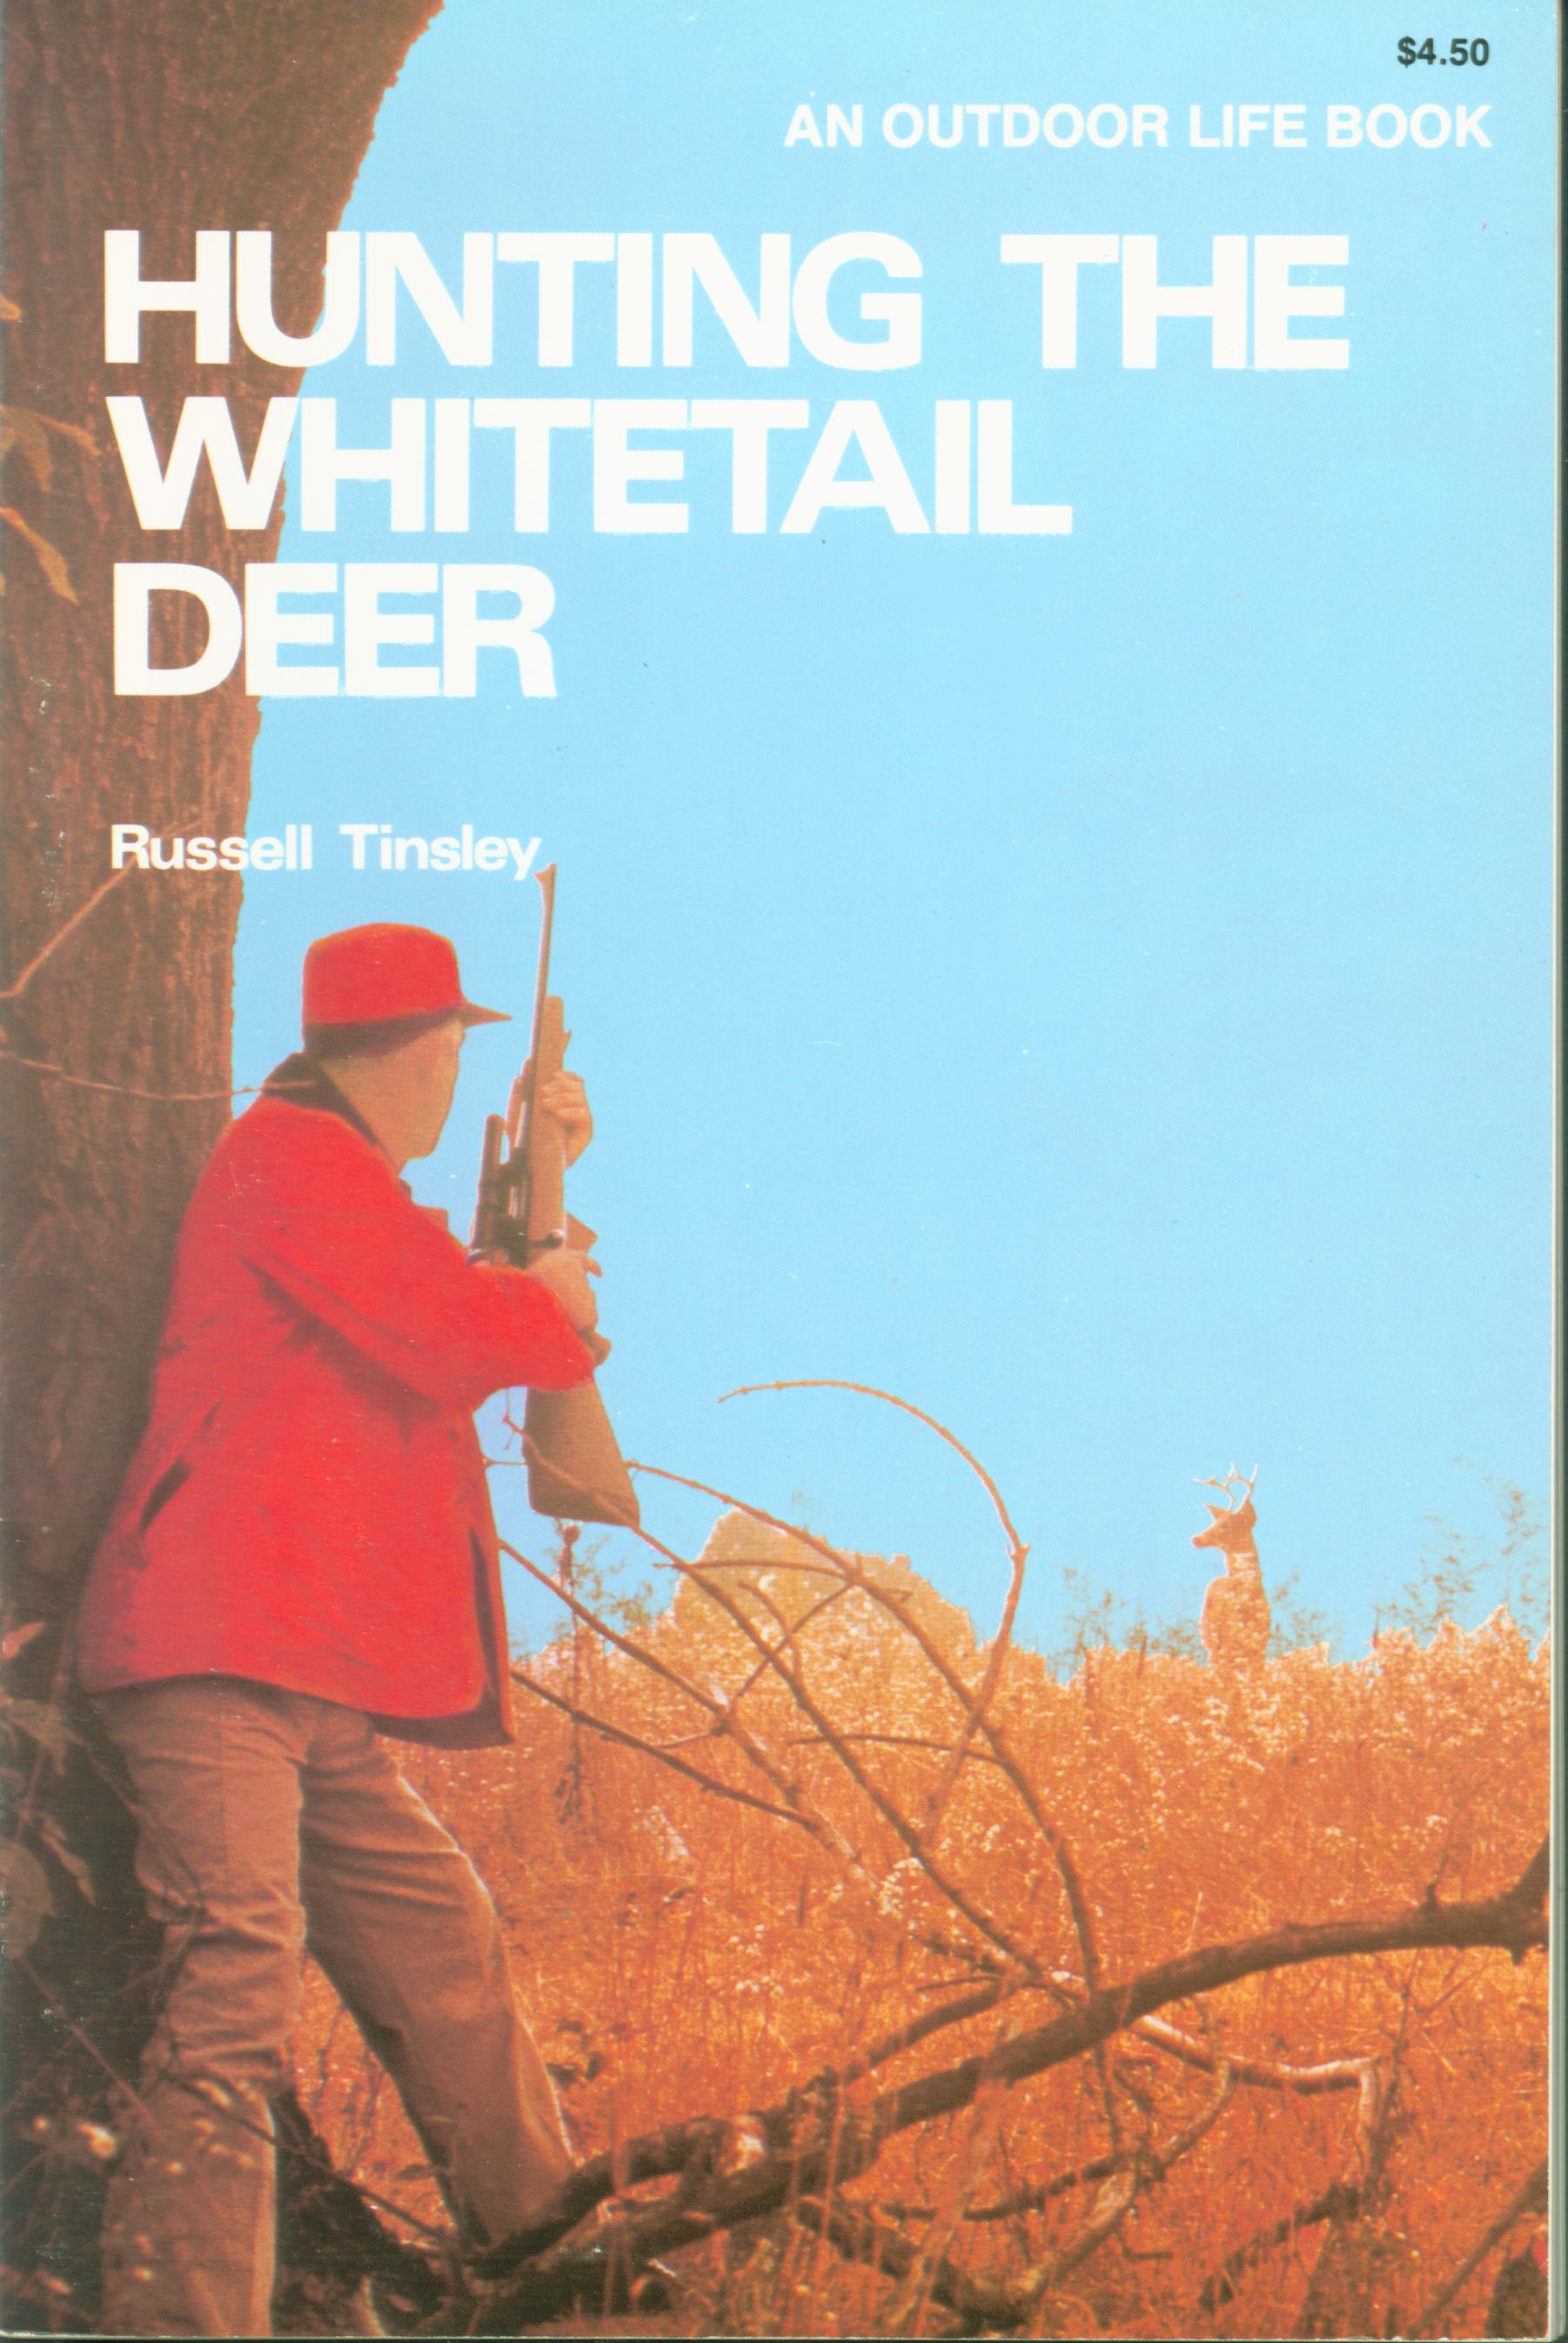 HUNTING THE WHITETAIL DEER. 